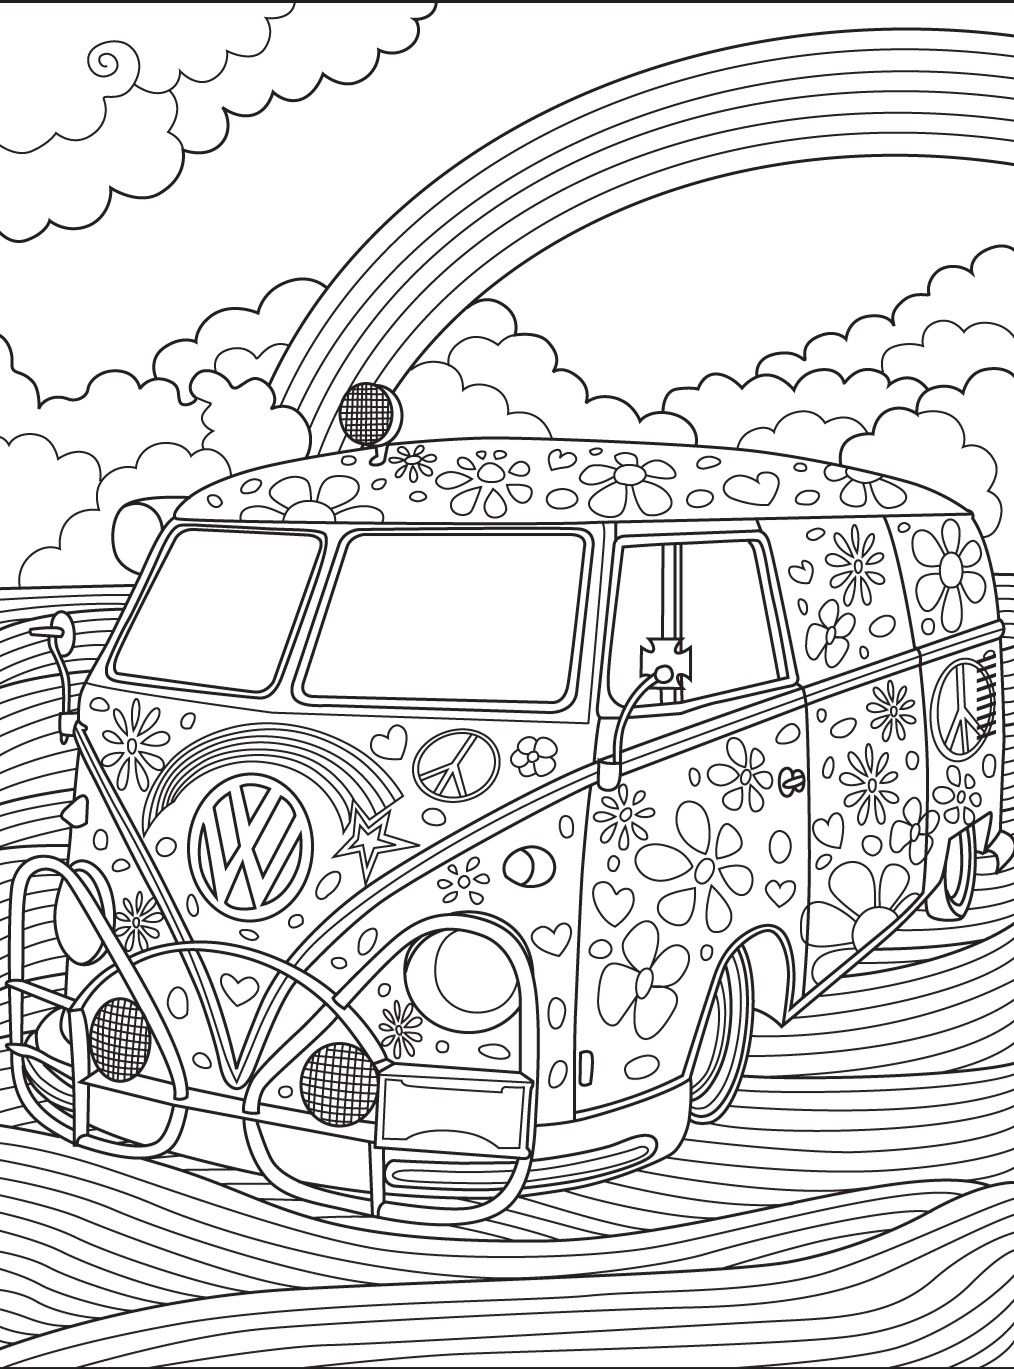 Vw Kombi Coloringpage Colorish Coloring Book For Adults By